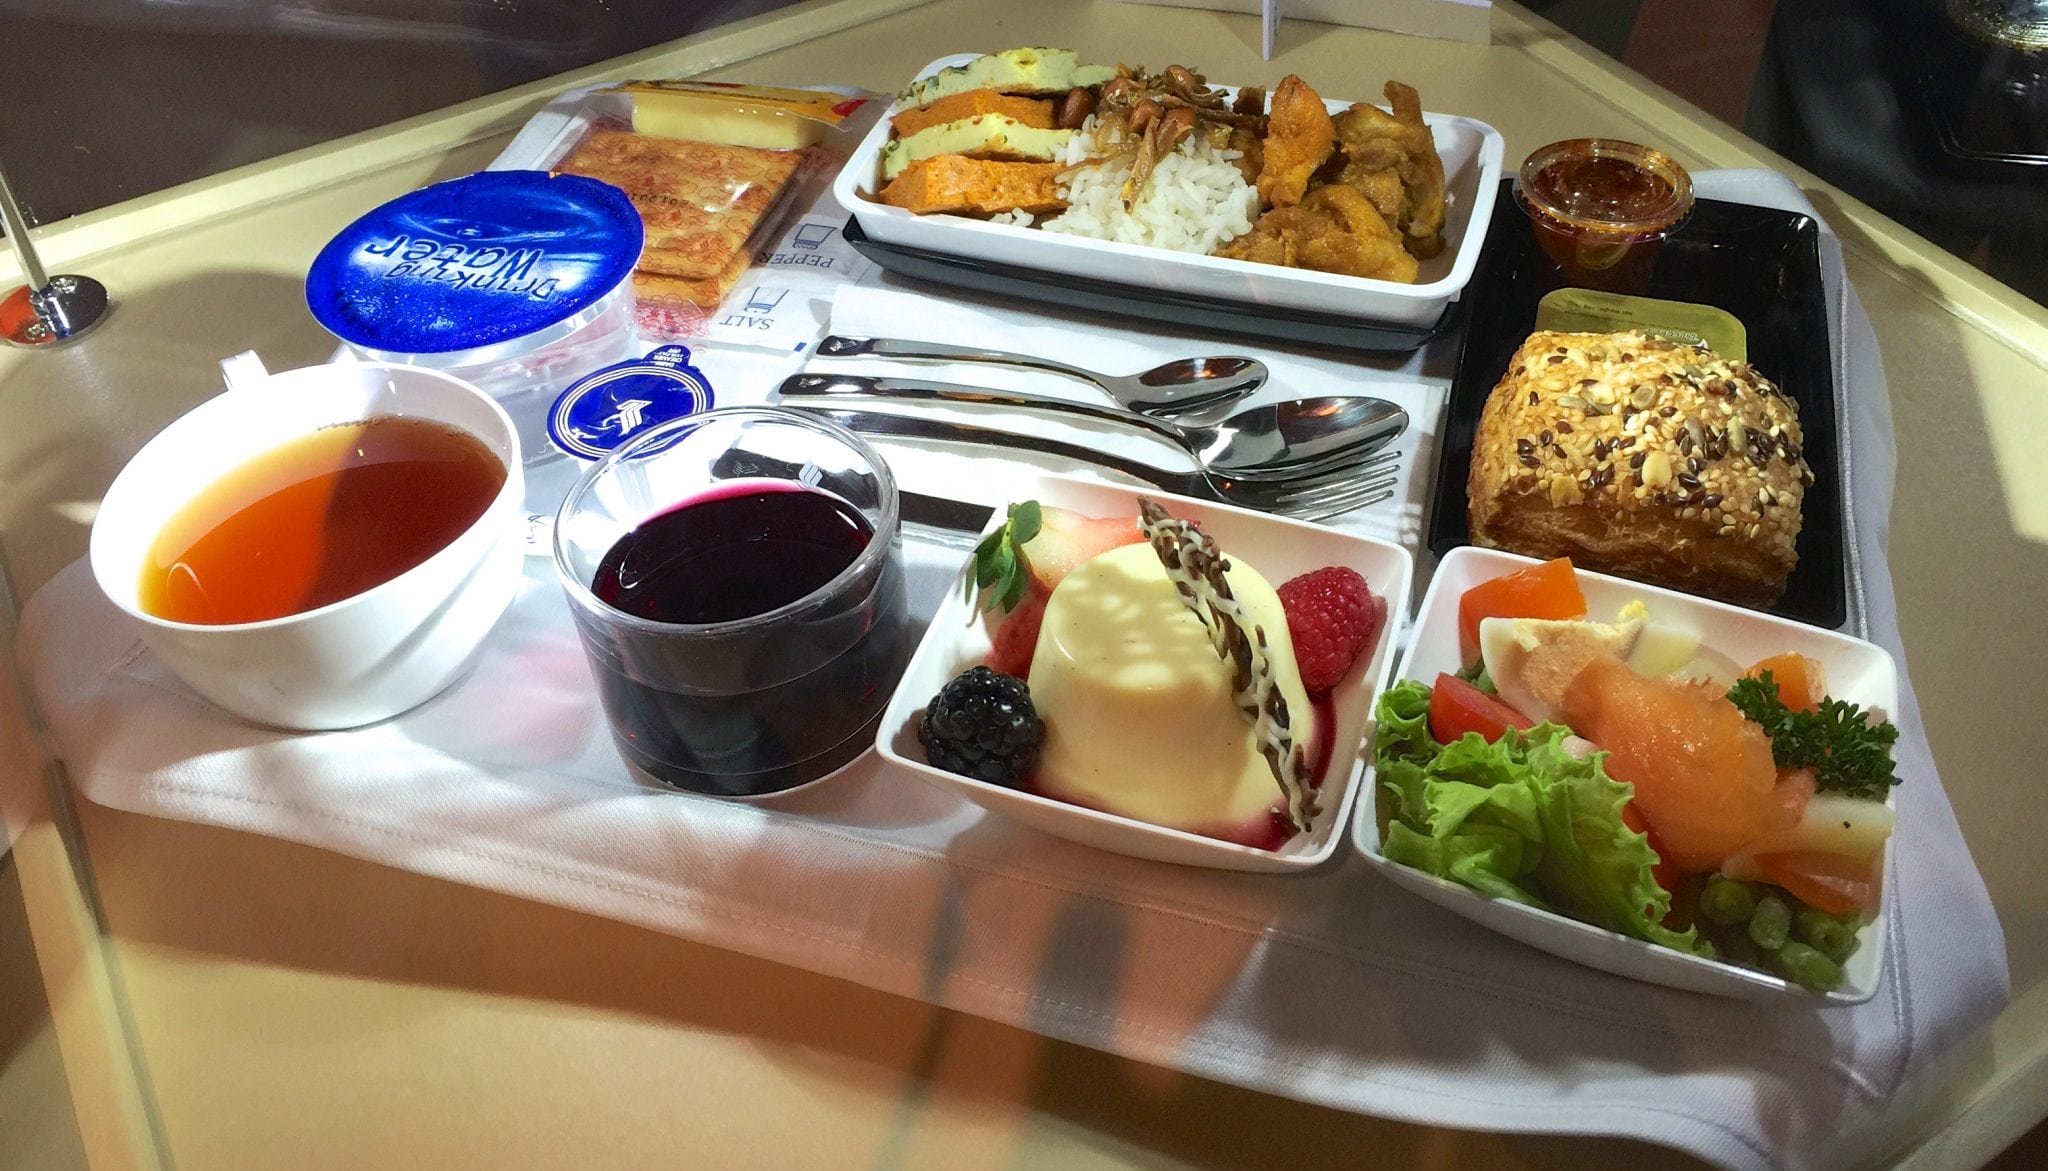 A Singapore Airlines premium economy meal. Airlines are wary of allocating too much room to premium economy, but many are upgrading other parts of the experience.